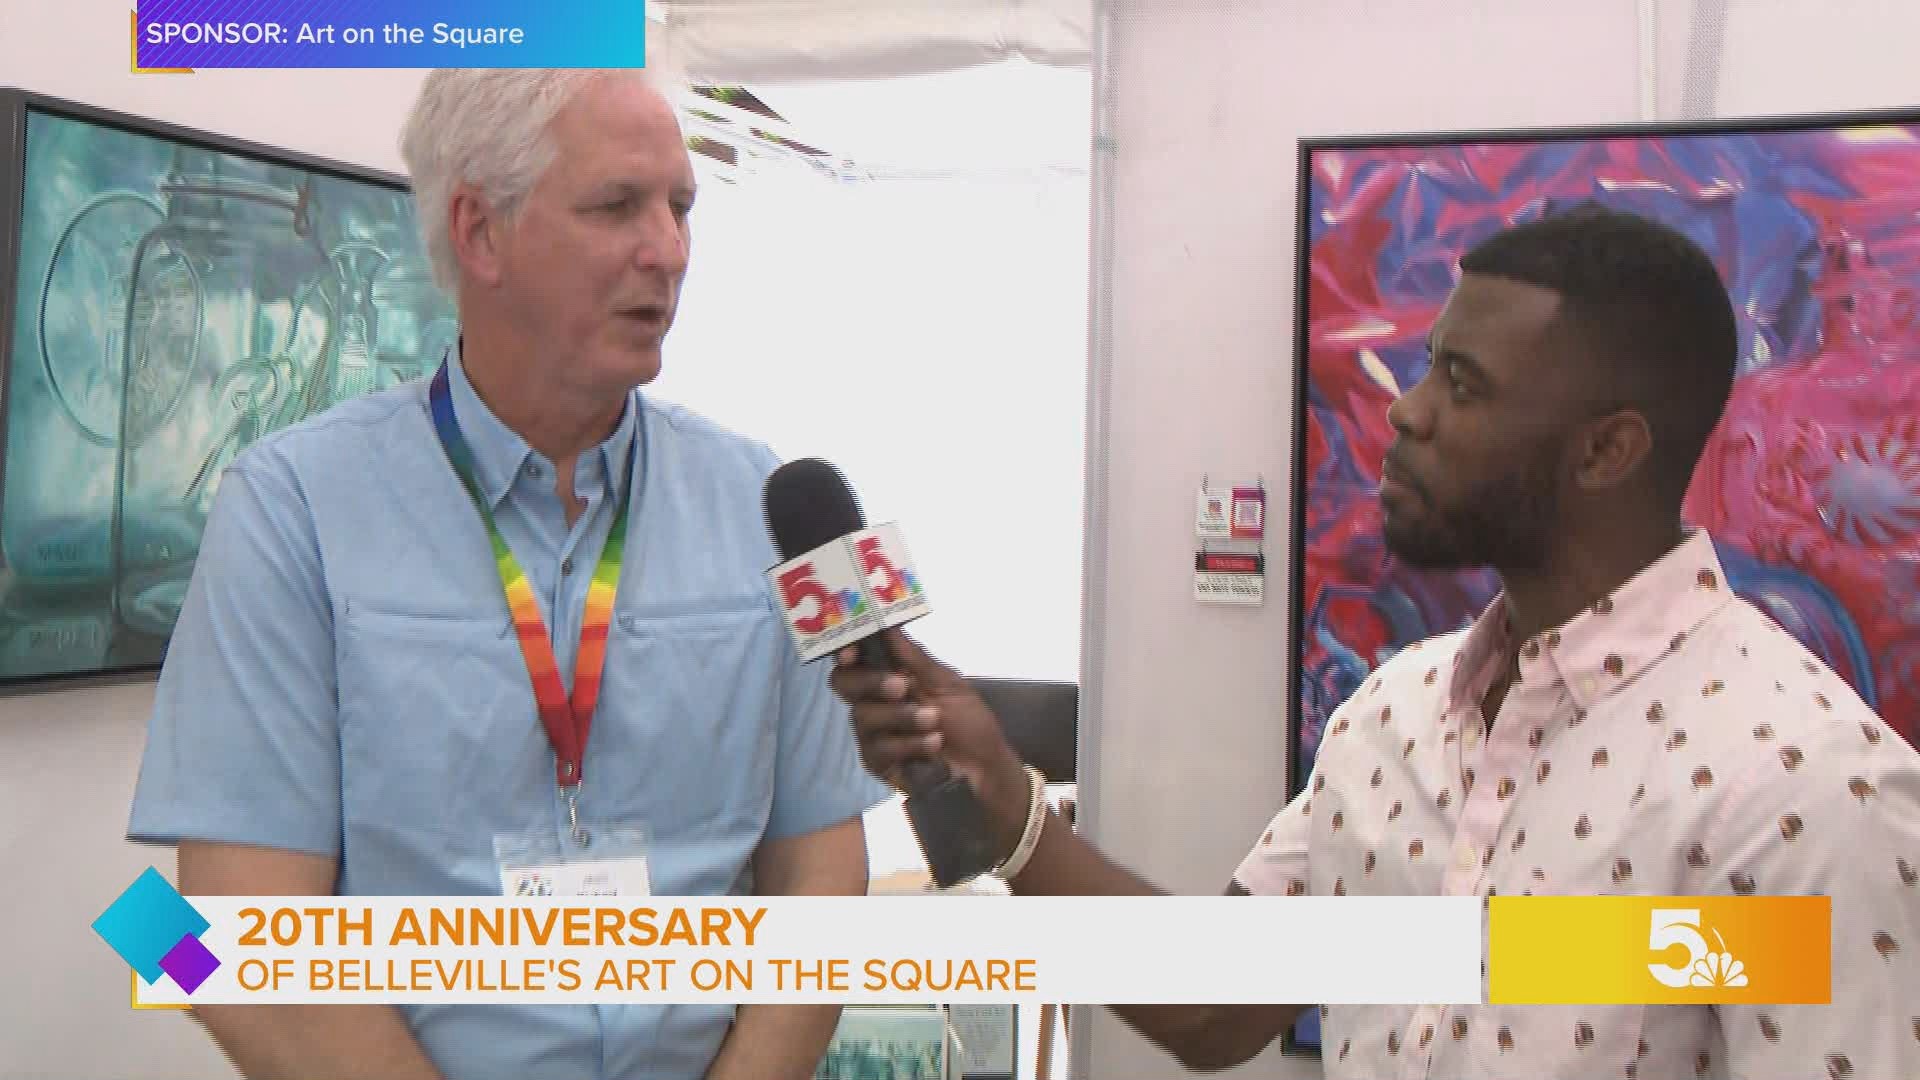 Malik Wilson was live from Belleville’s Public Square with what we can expect.